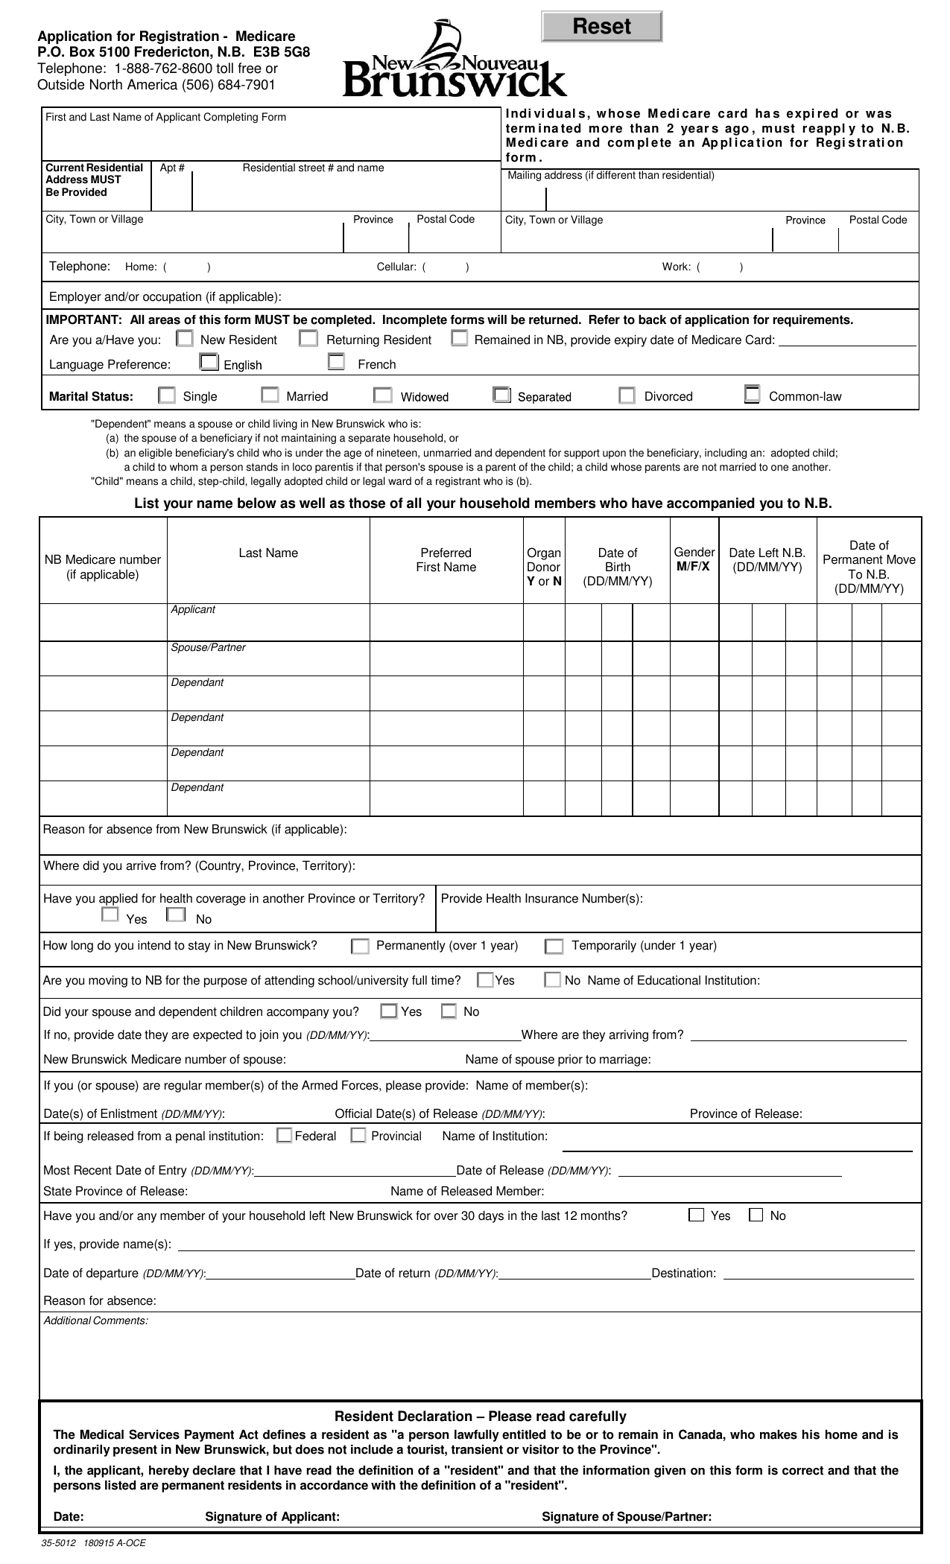 Form 35-5012 Application for Registration - Medicare - New Brunswick, Canada, Page 1